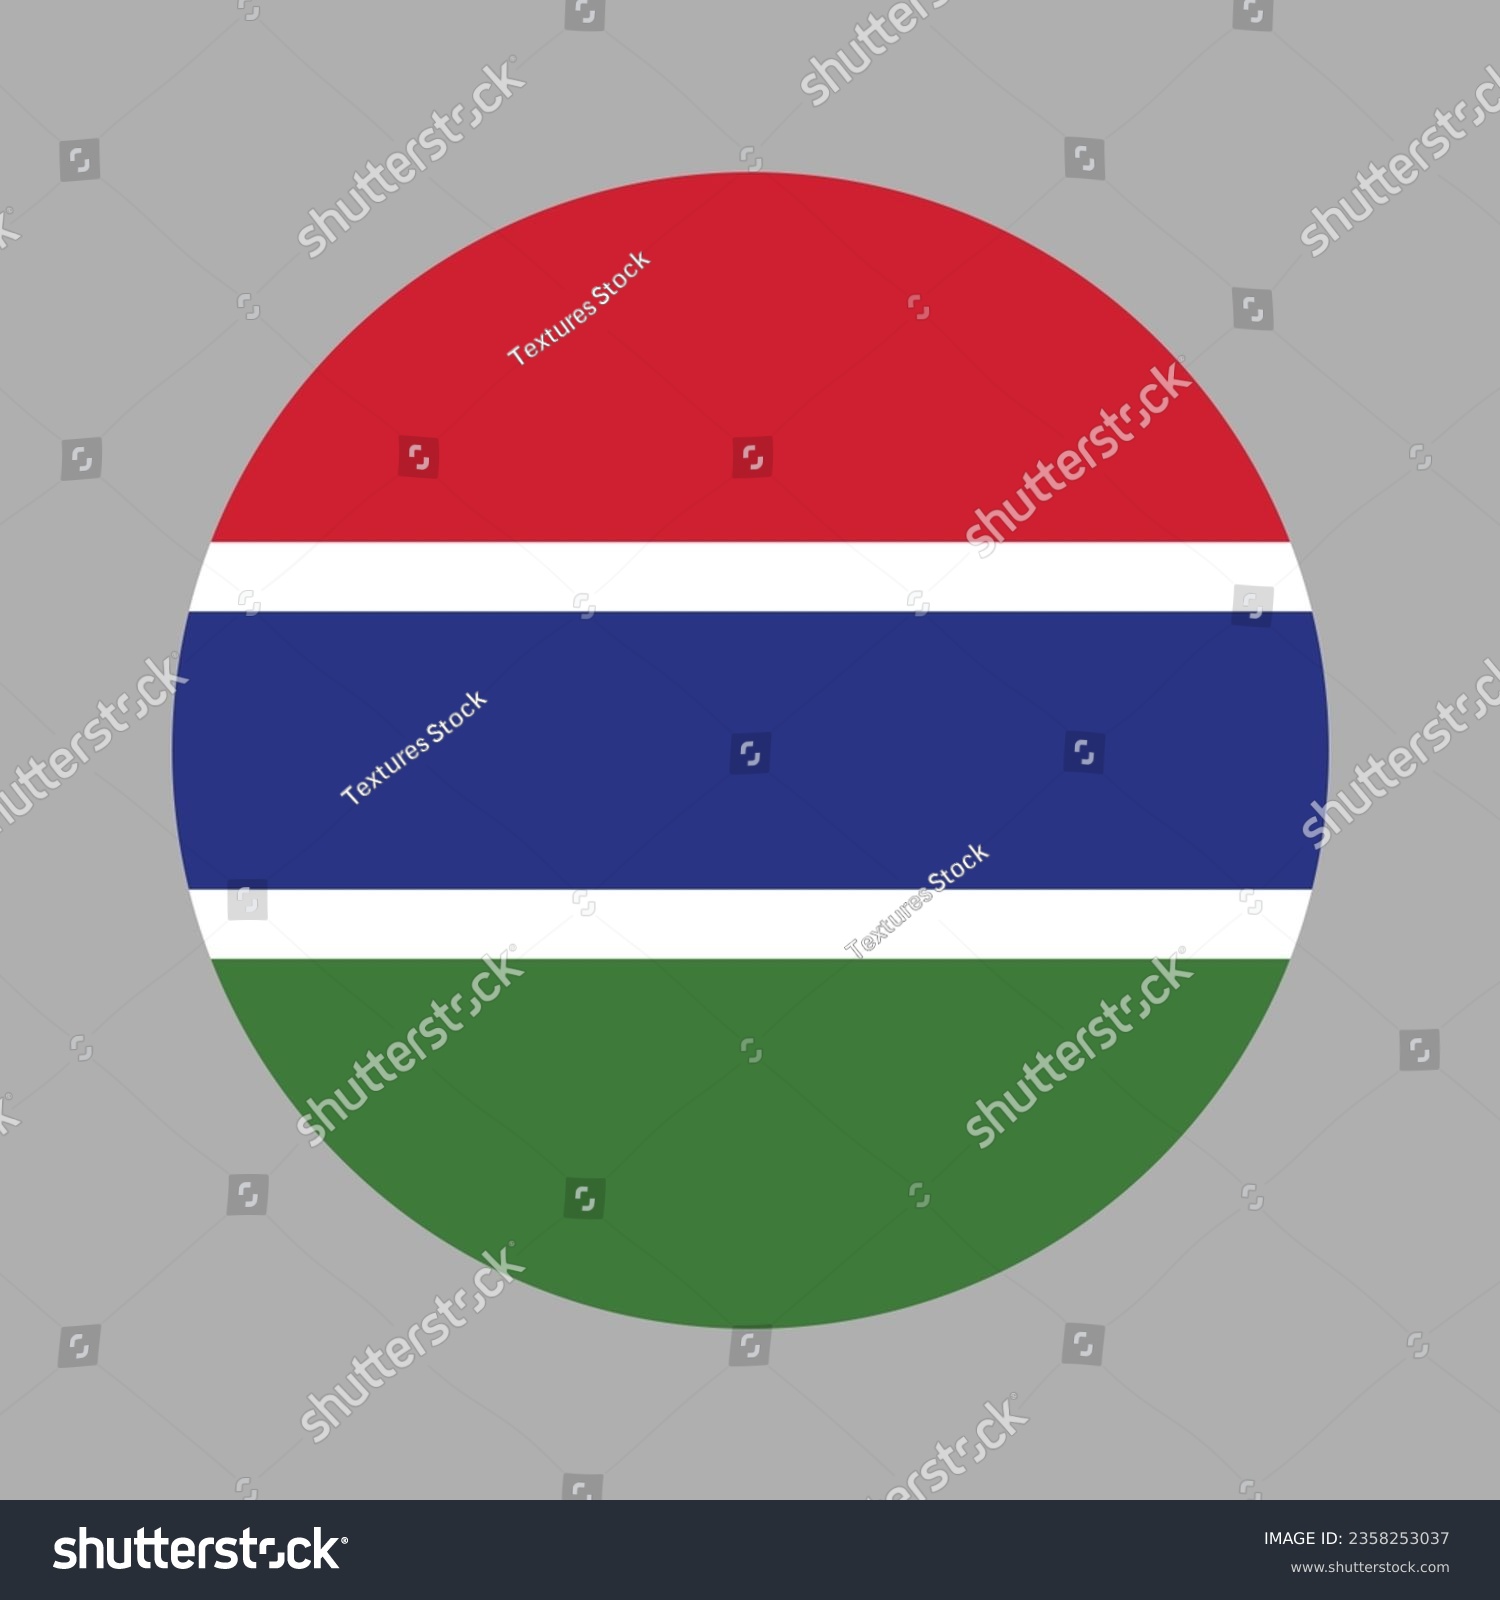 SVG of Flag of the Gambia. Flag icon. Standard color. Circle icon flag. Computer illustration. Digital illustration. Vector illustration. svg